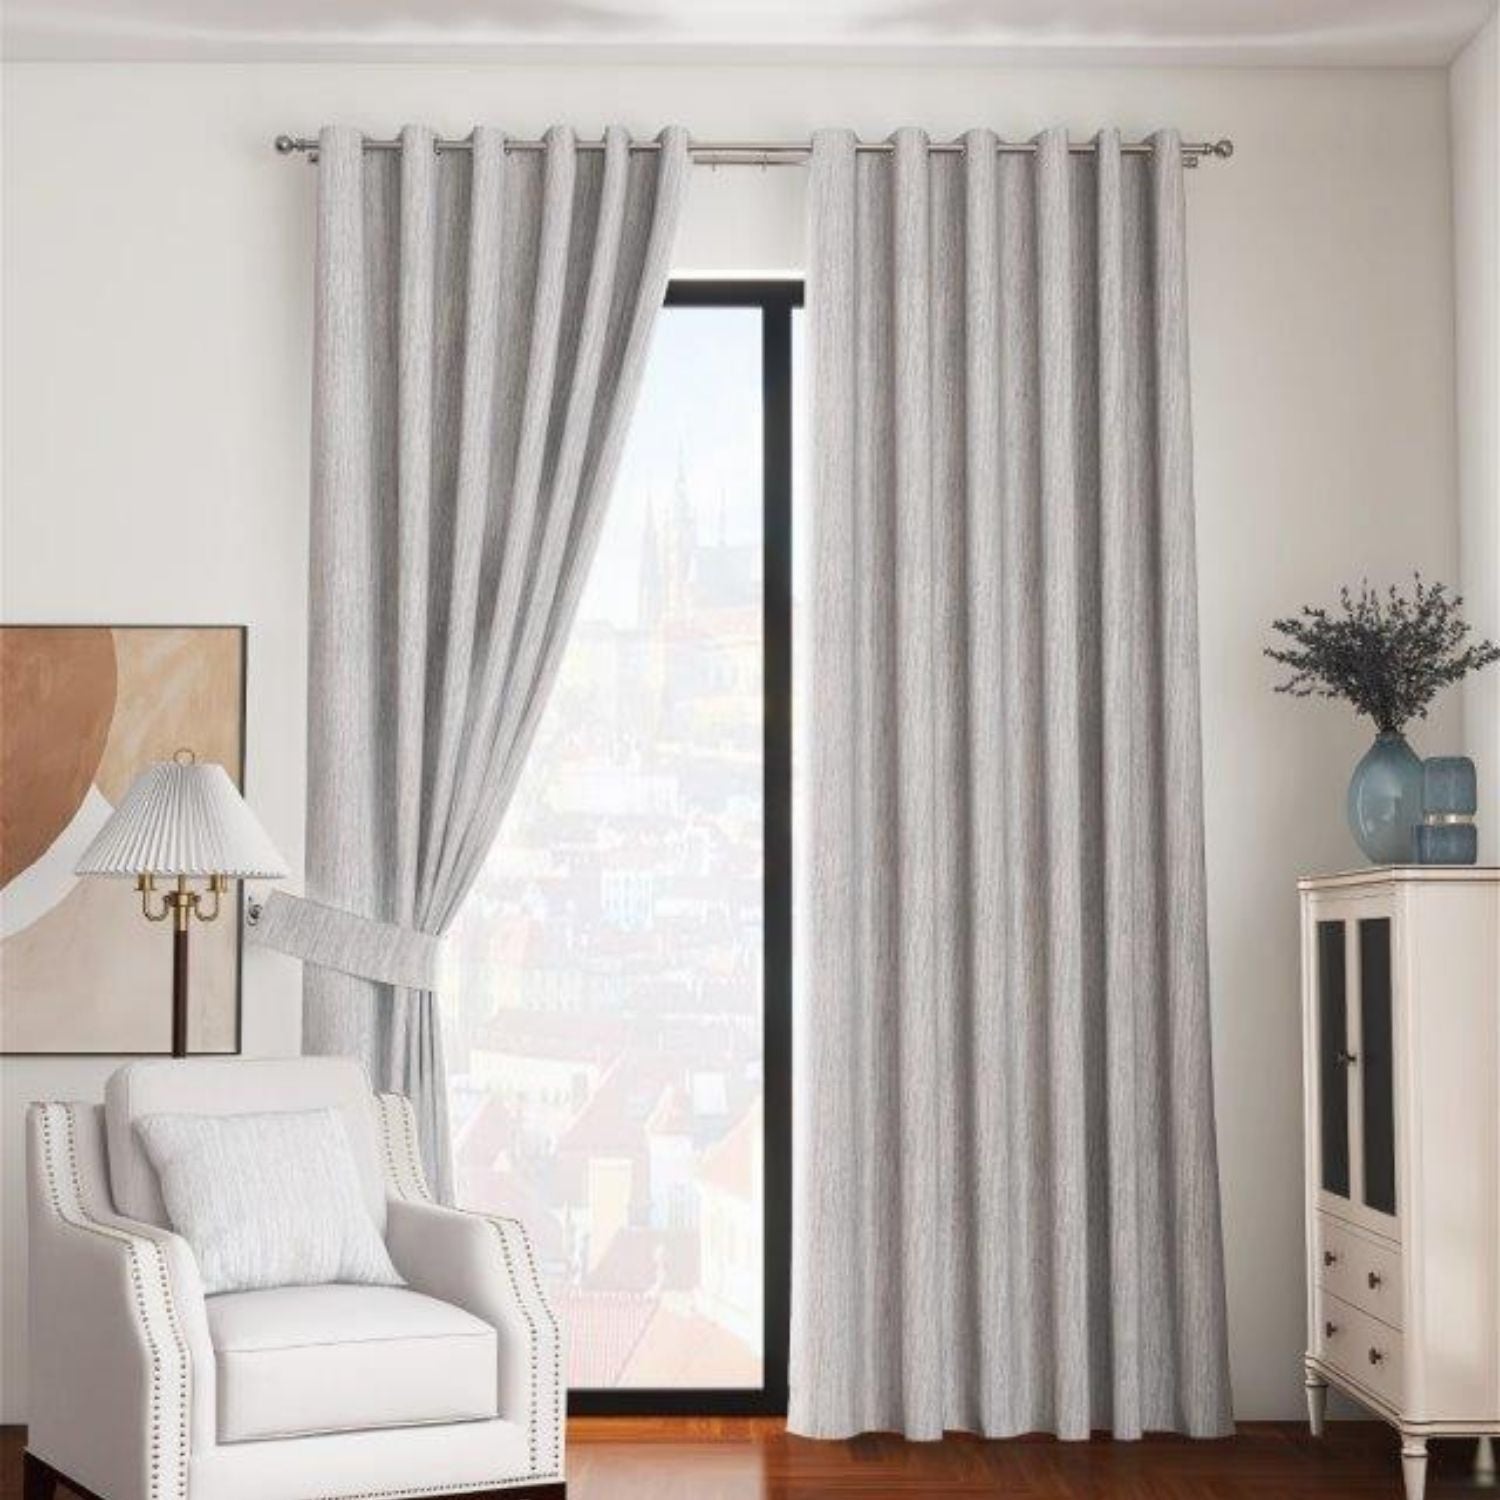 The Home Anton Curtains - Silver 1 Shaws Department Stores